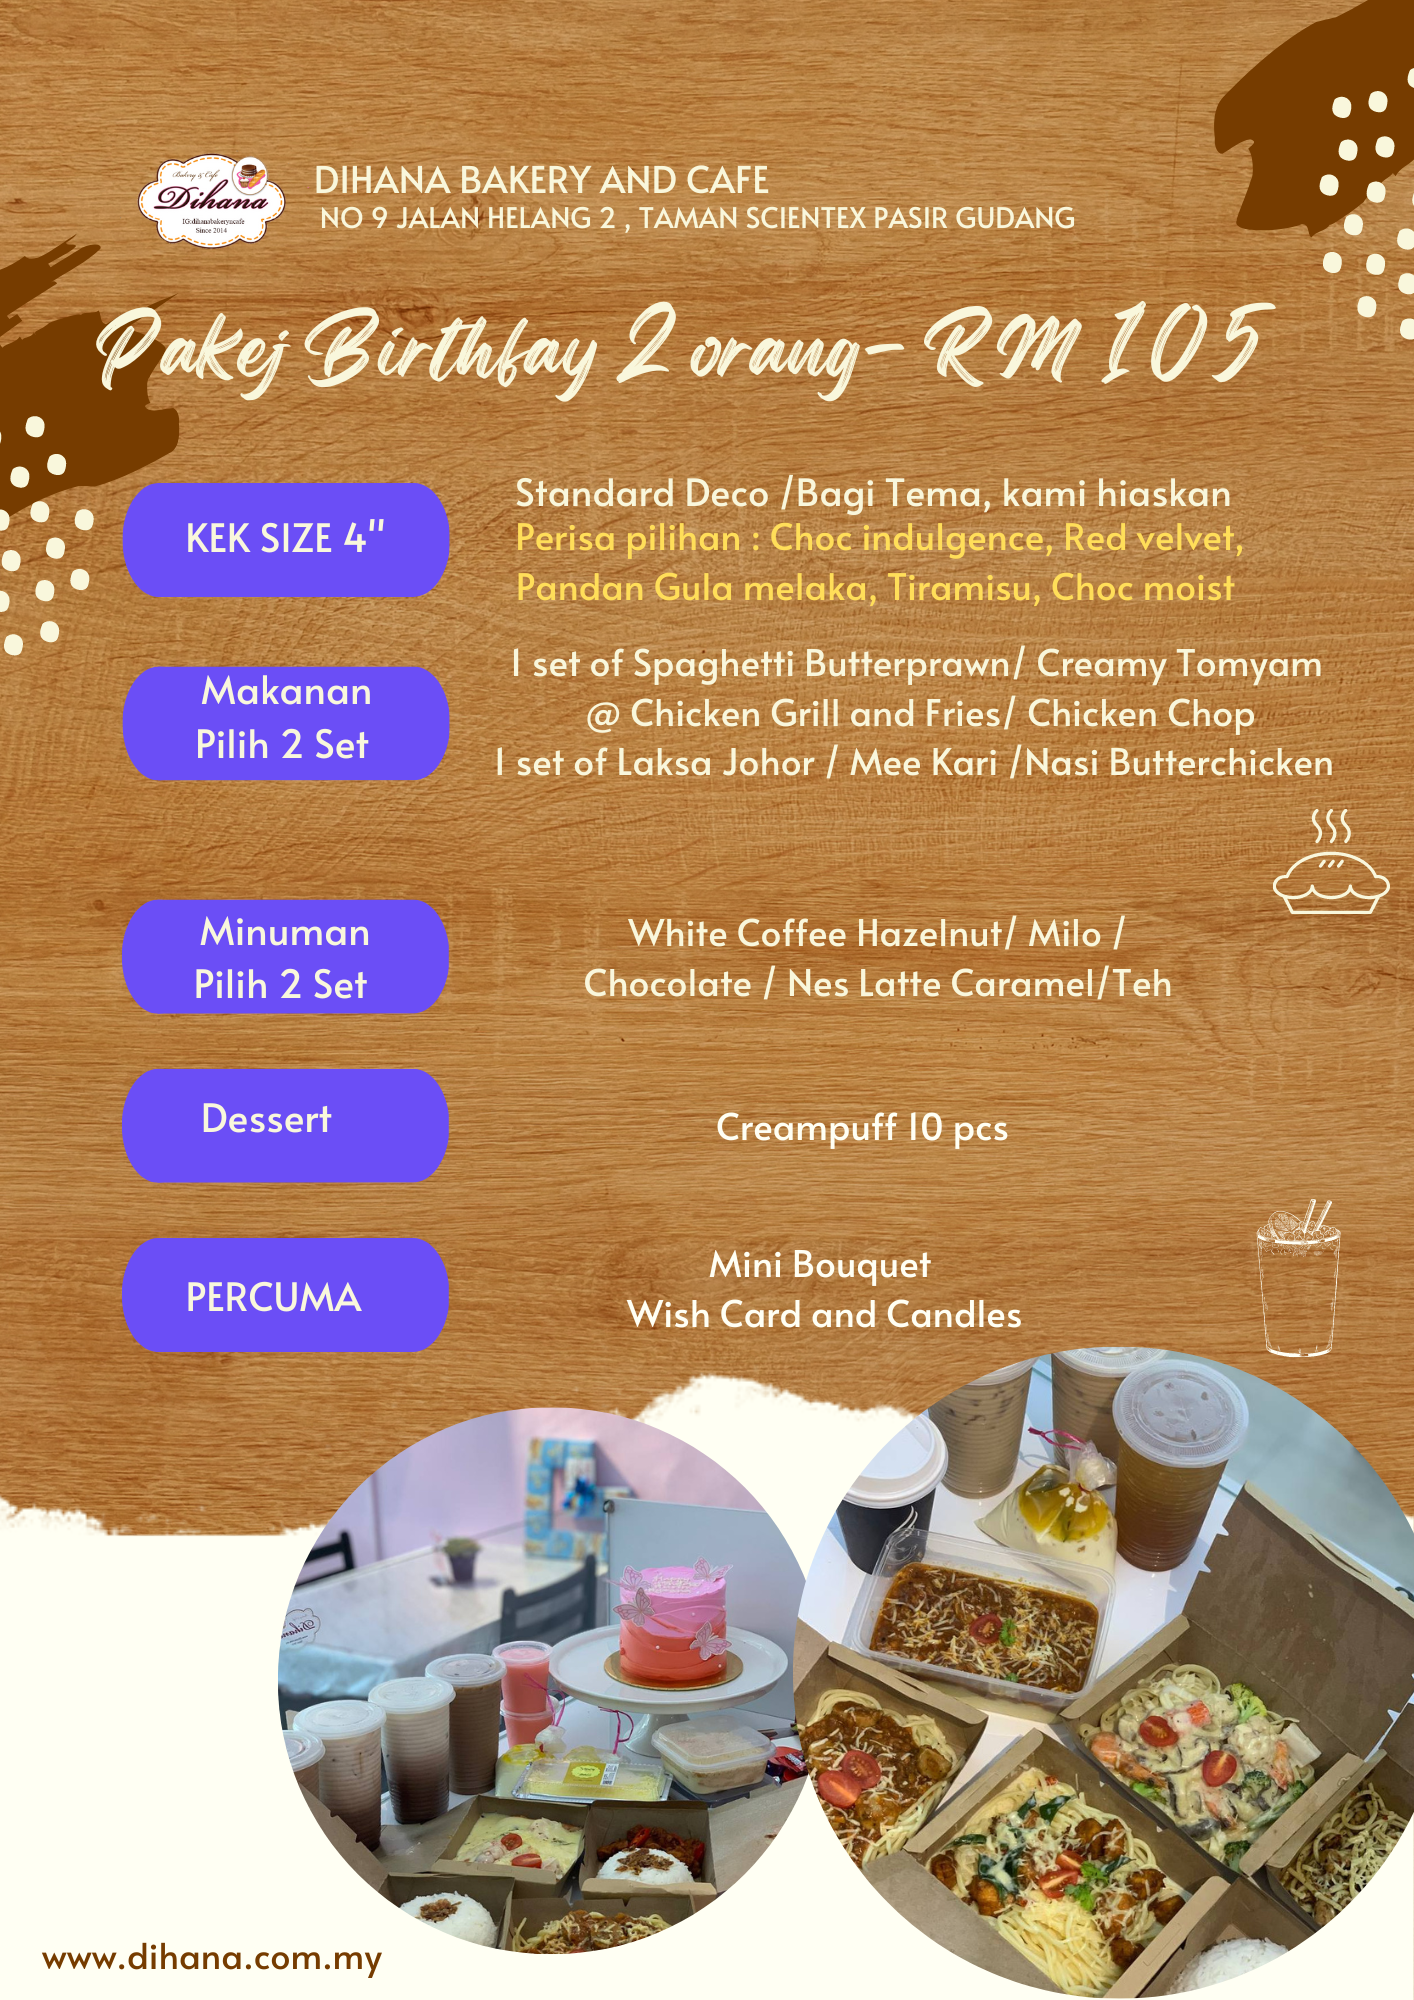 Birthday Package 2 Pax